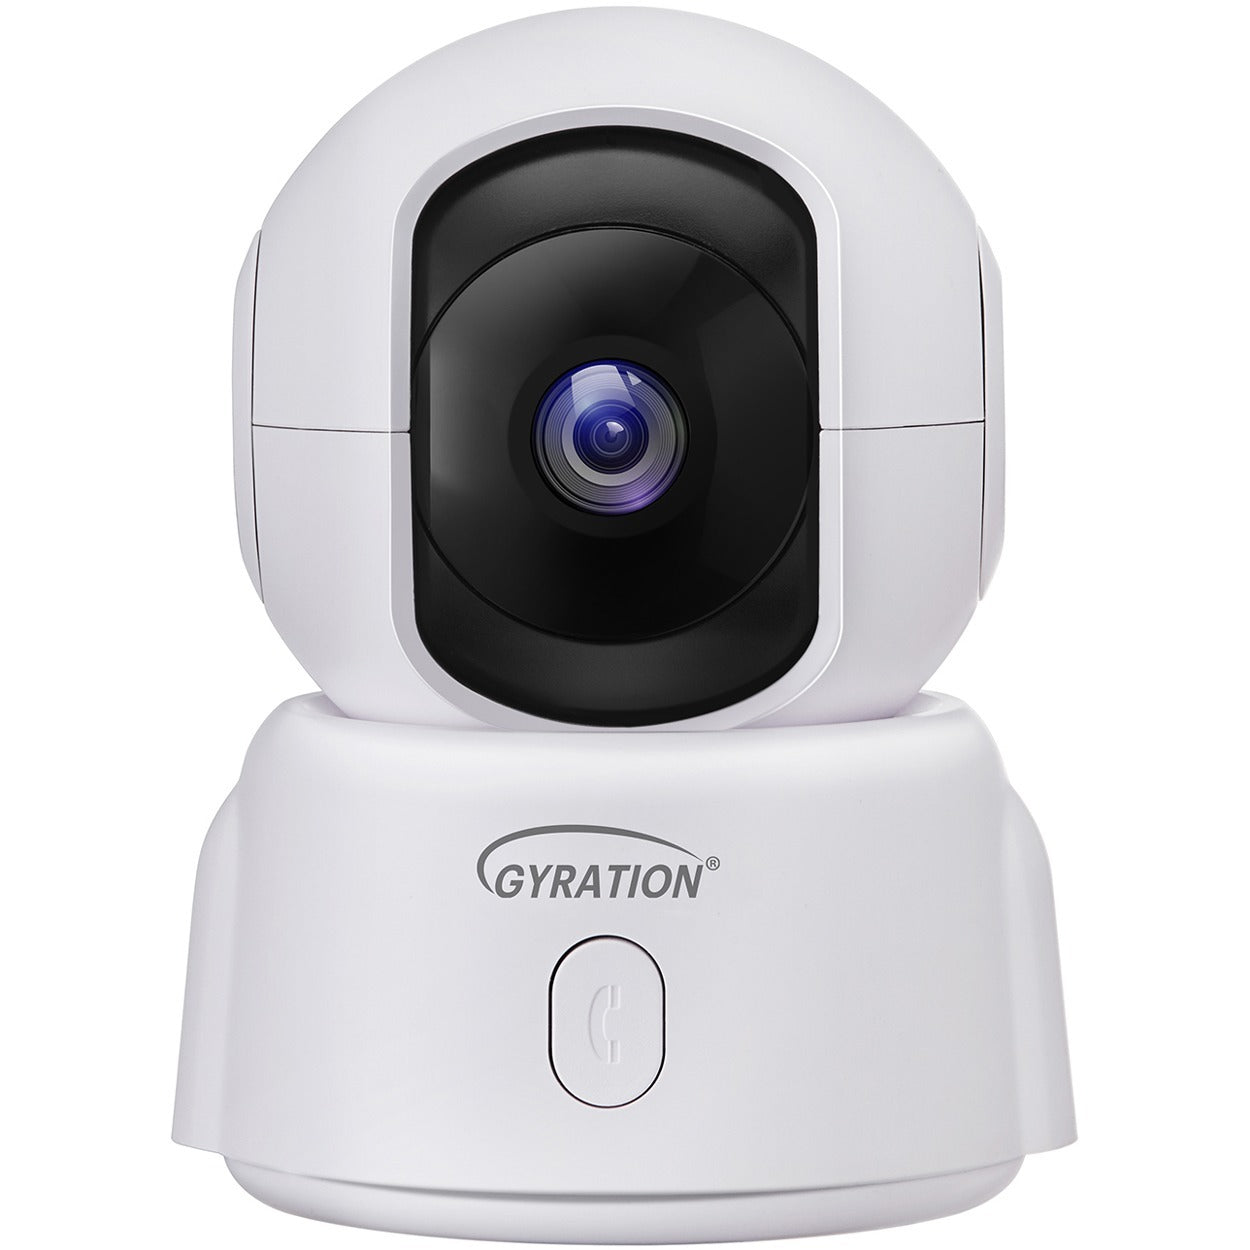 Adesso Gyration Cyberview Cyberview 2000 2 Megapixel Indoor Full HD Network Camera SpadezStore